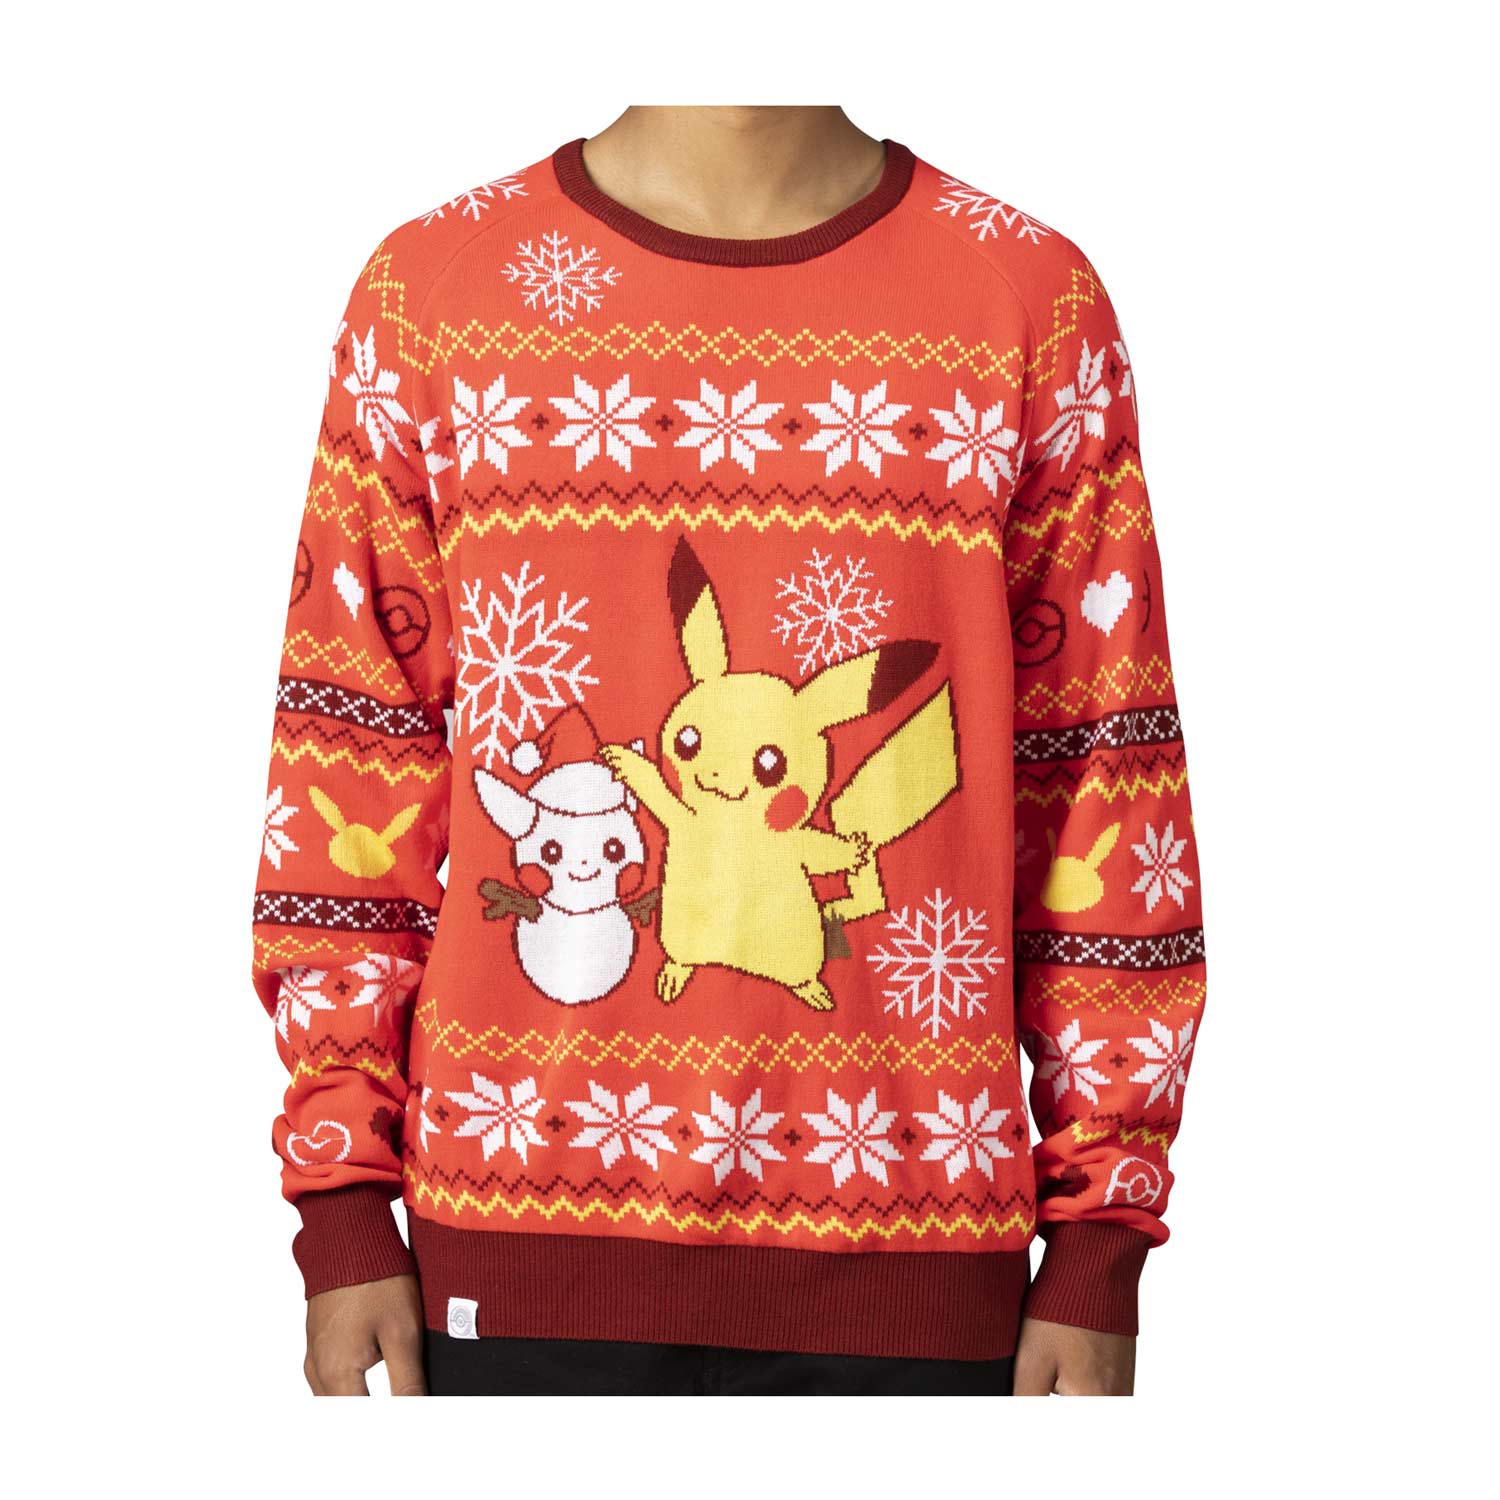 Pikachu Holiday Friend Red Knit Sweater - Adult